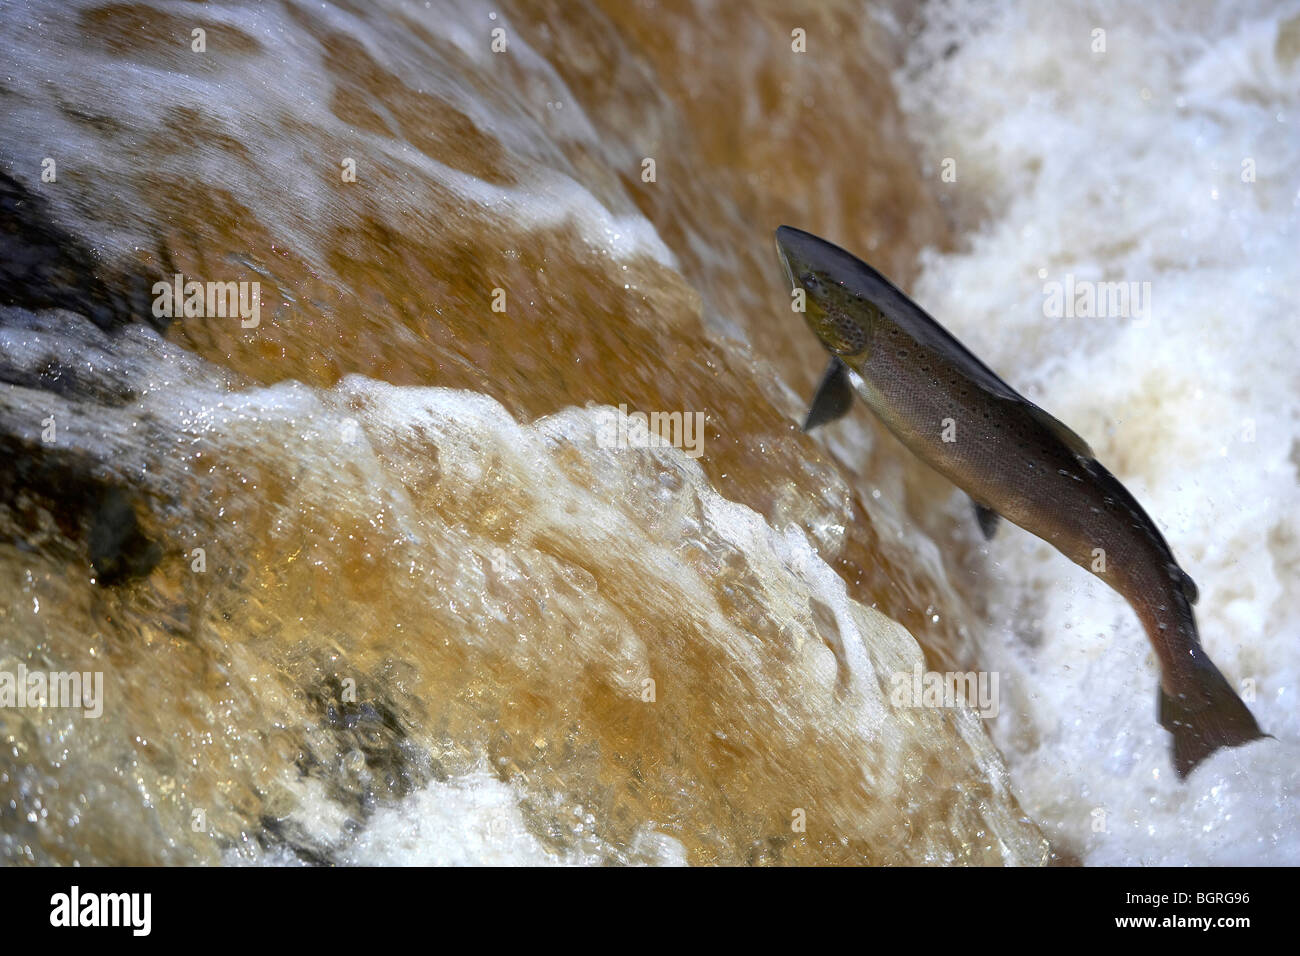 Wild Atlantic Salmon, Salmo salar leaping up a waterfall on the River Ribble, Stainforth, Yorkshire Dales, UK Stock Photo